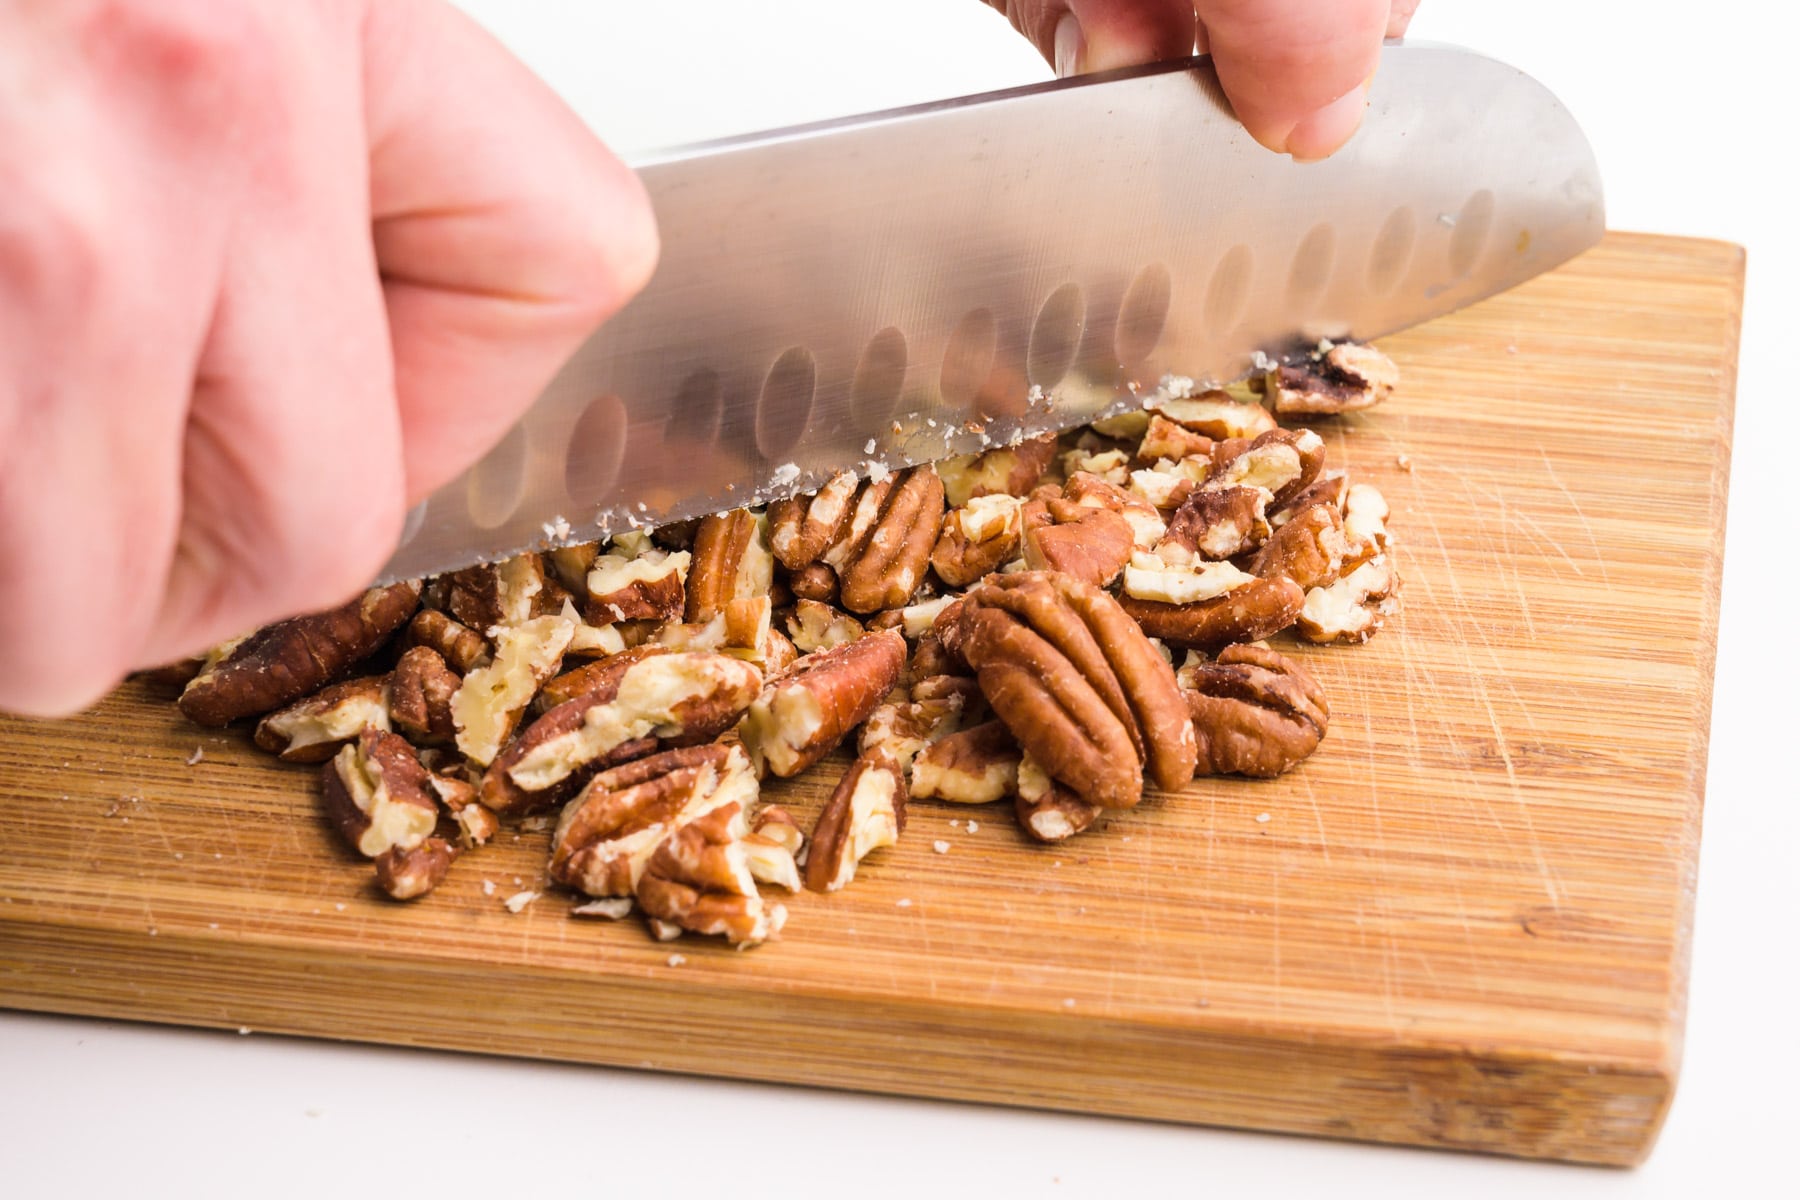 A hand holds a knife, chopping pecans on a cutting board.